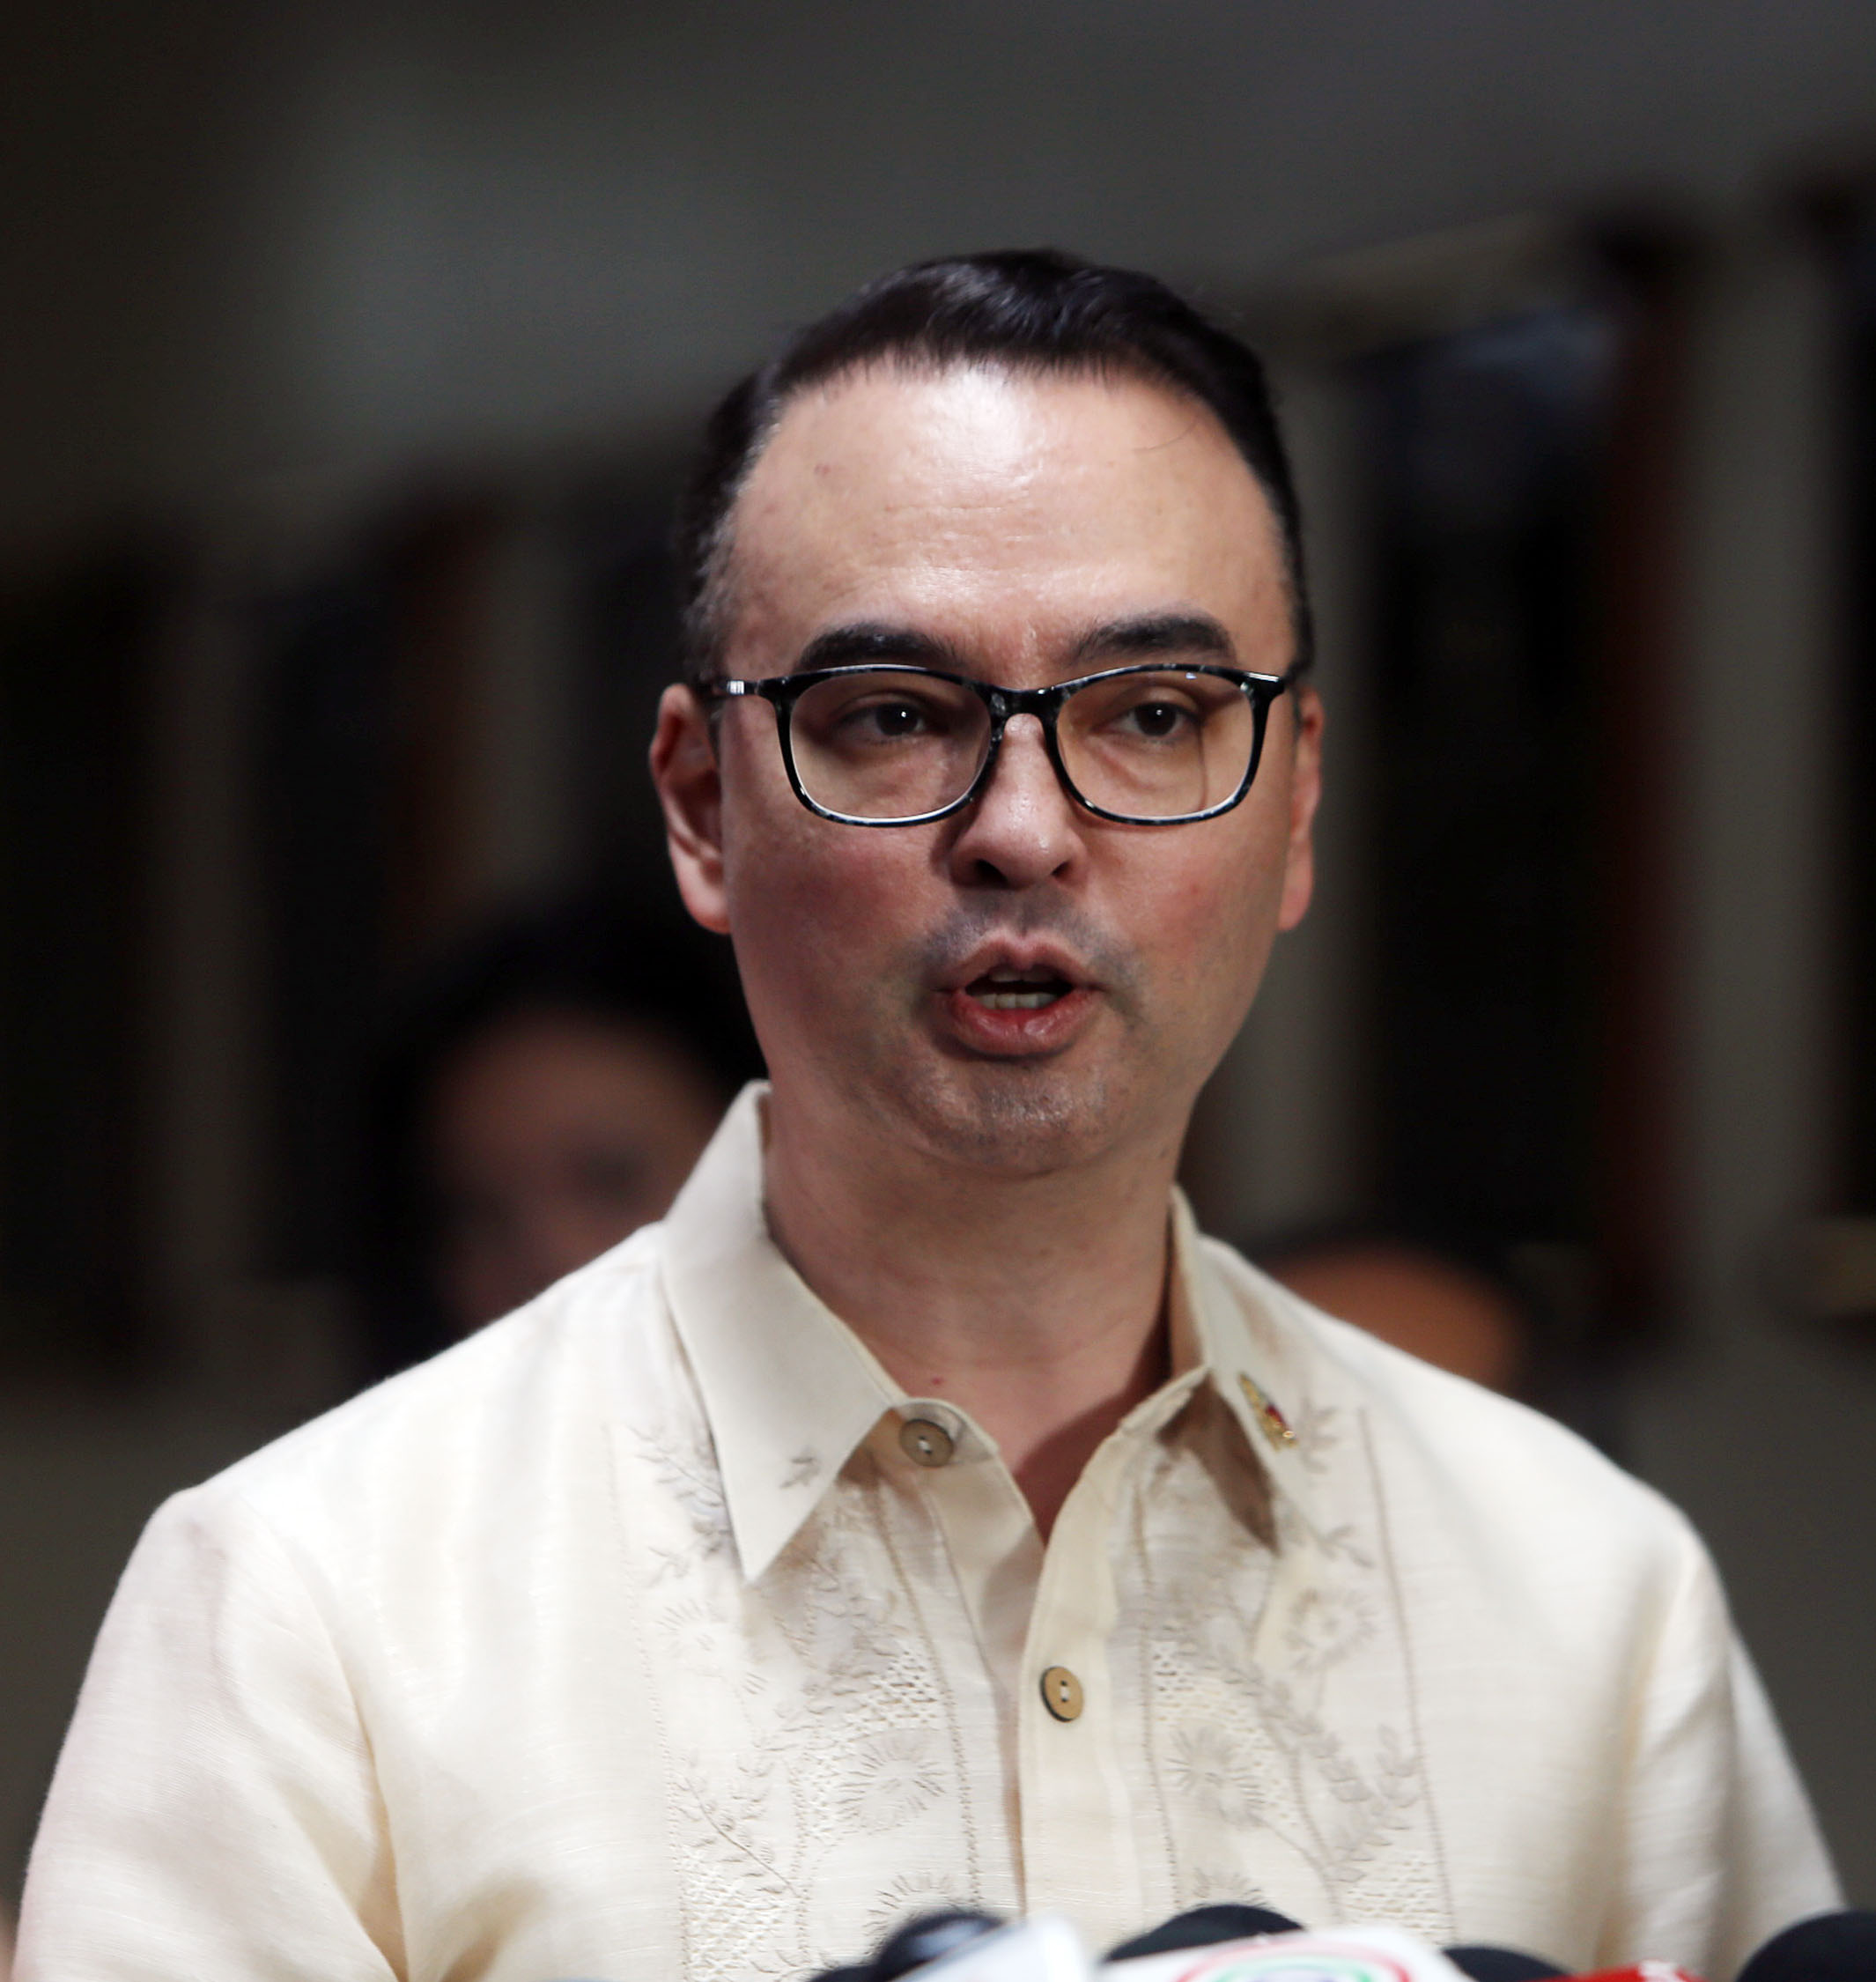 NOVEMBER 19, 2019 House Speaker Allan Peter Cayetano answers questions from the media after the hearing on SEA Games Cauldron issue at the Session hall of the Senate, in Pasay City. EDWIN BACASMAS